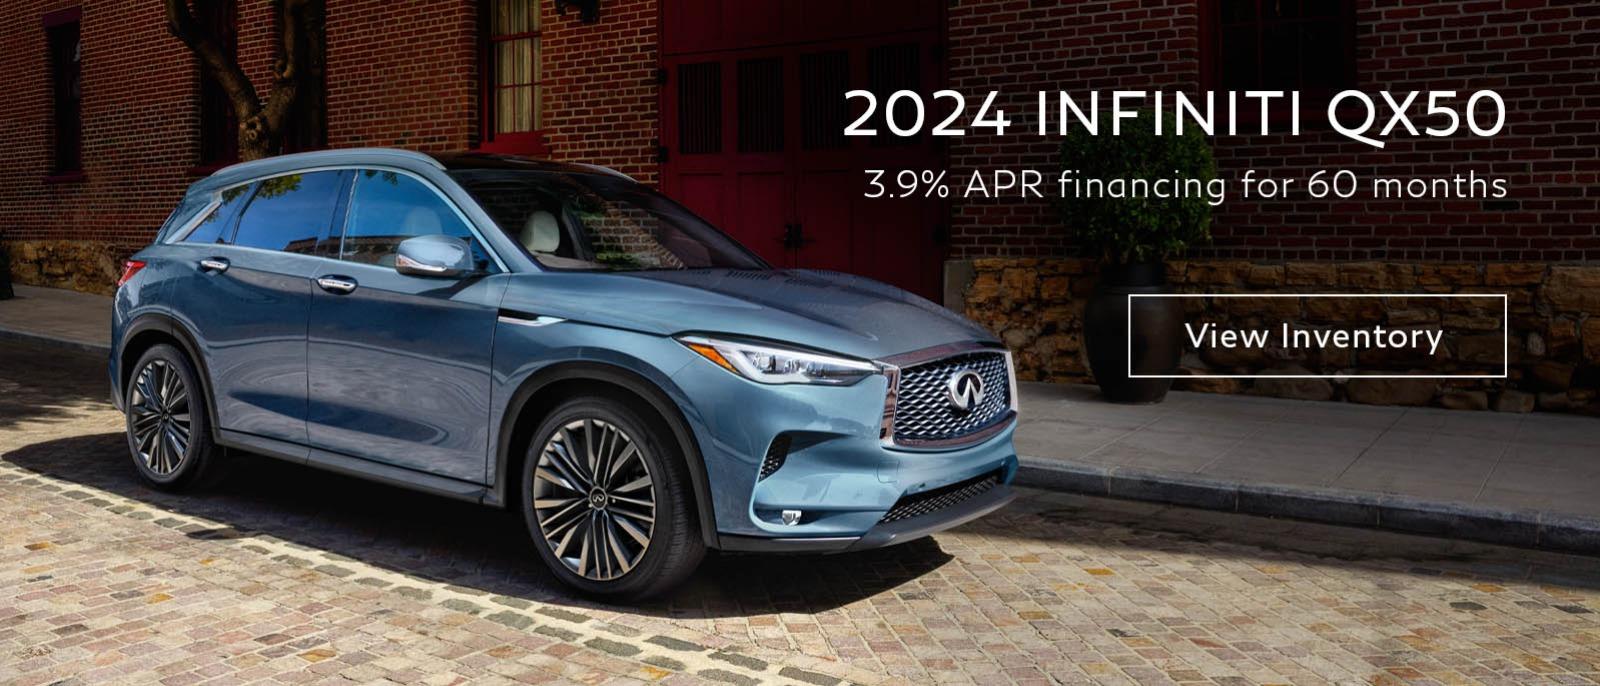 3.9% APR Financing for 60 Months on 2024 QX50